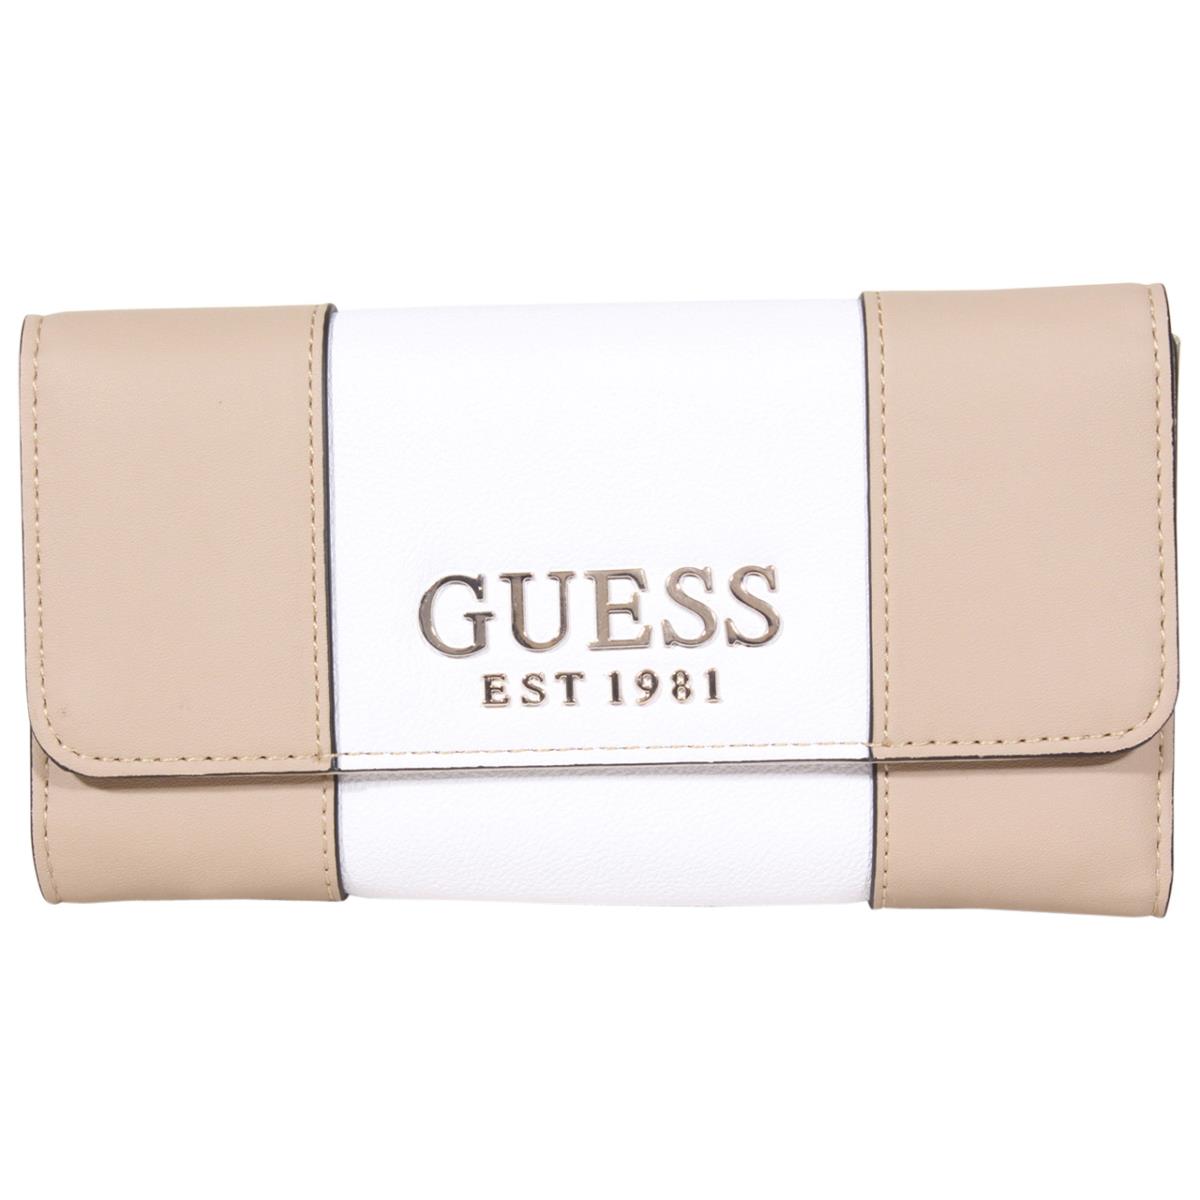 Guess Holly Wallet Women`s Tri-fold Clutch Multicolor